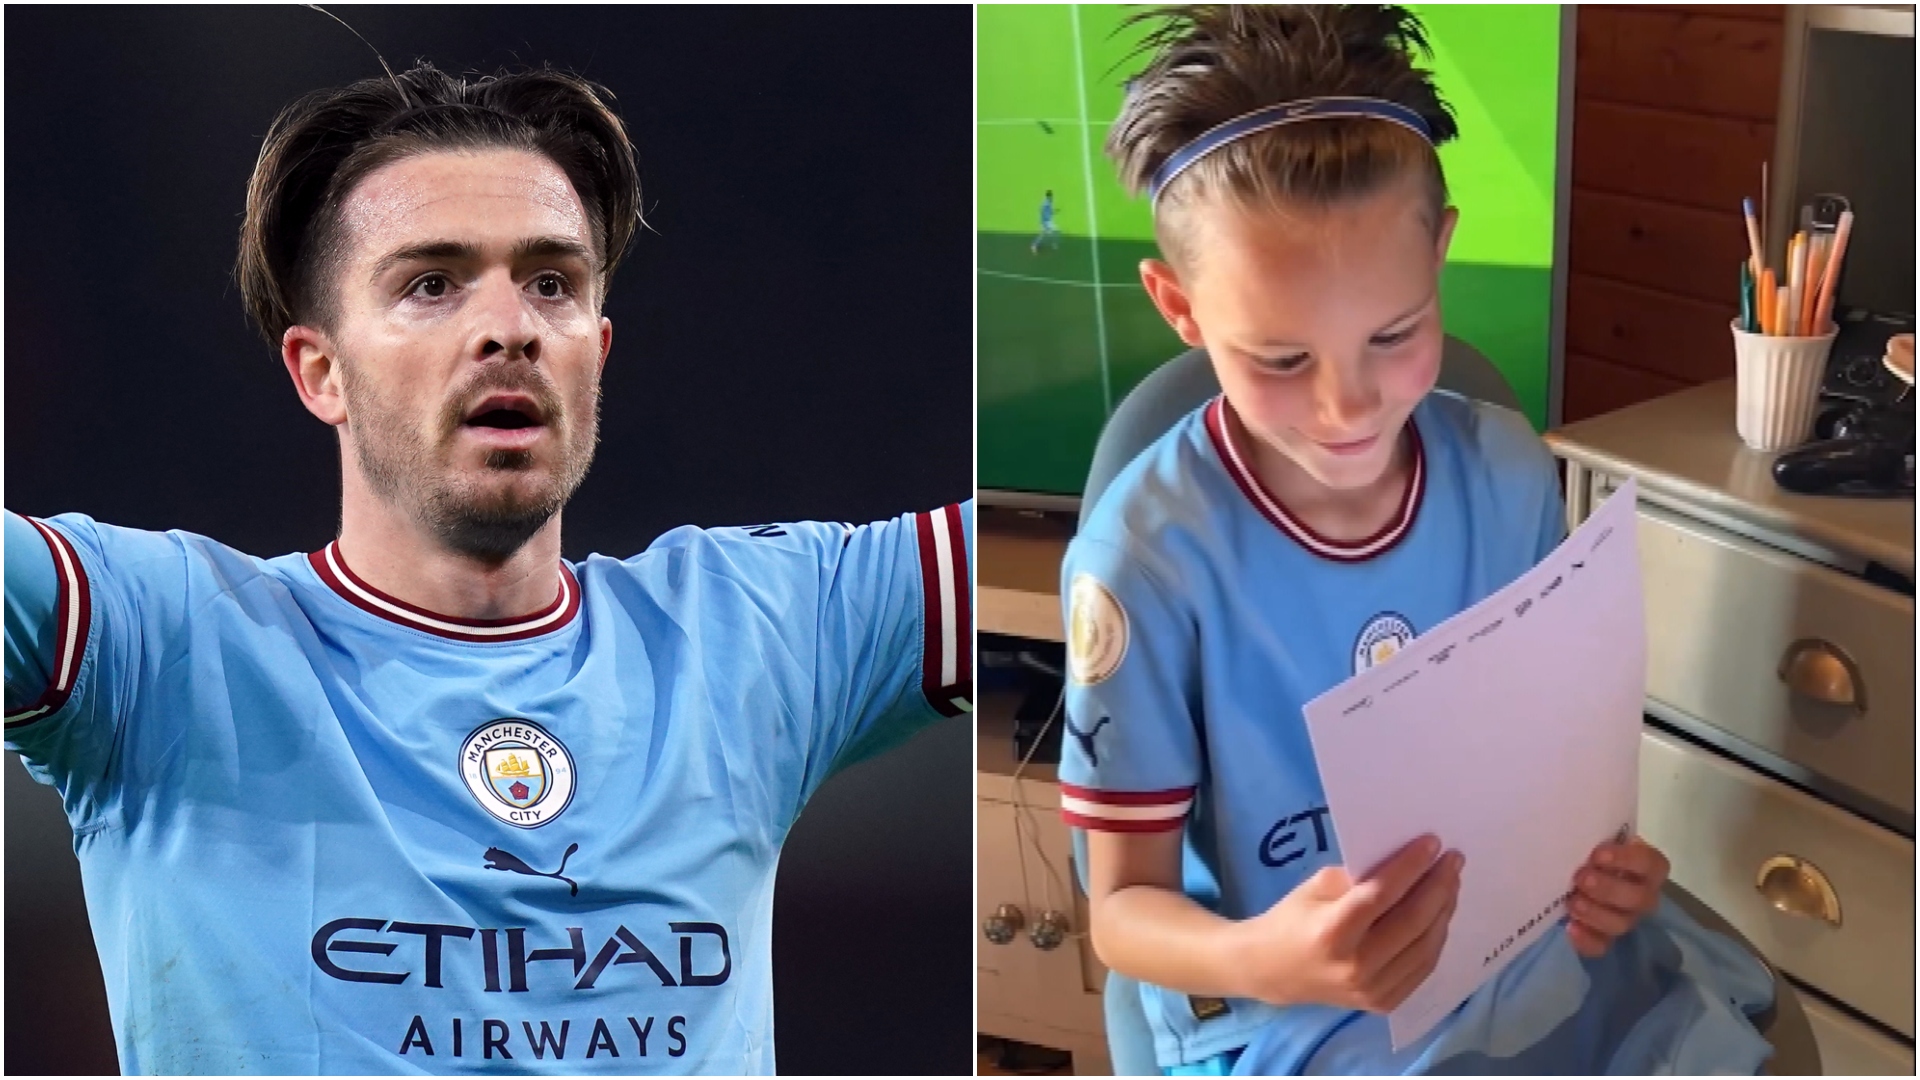 Manchester City star Jack Grealish sends visually impaired fan braille  letter and signed shirt